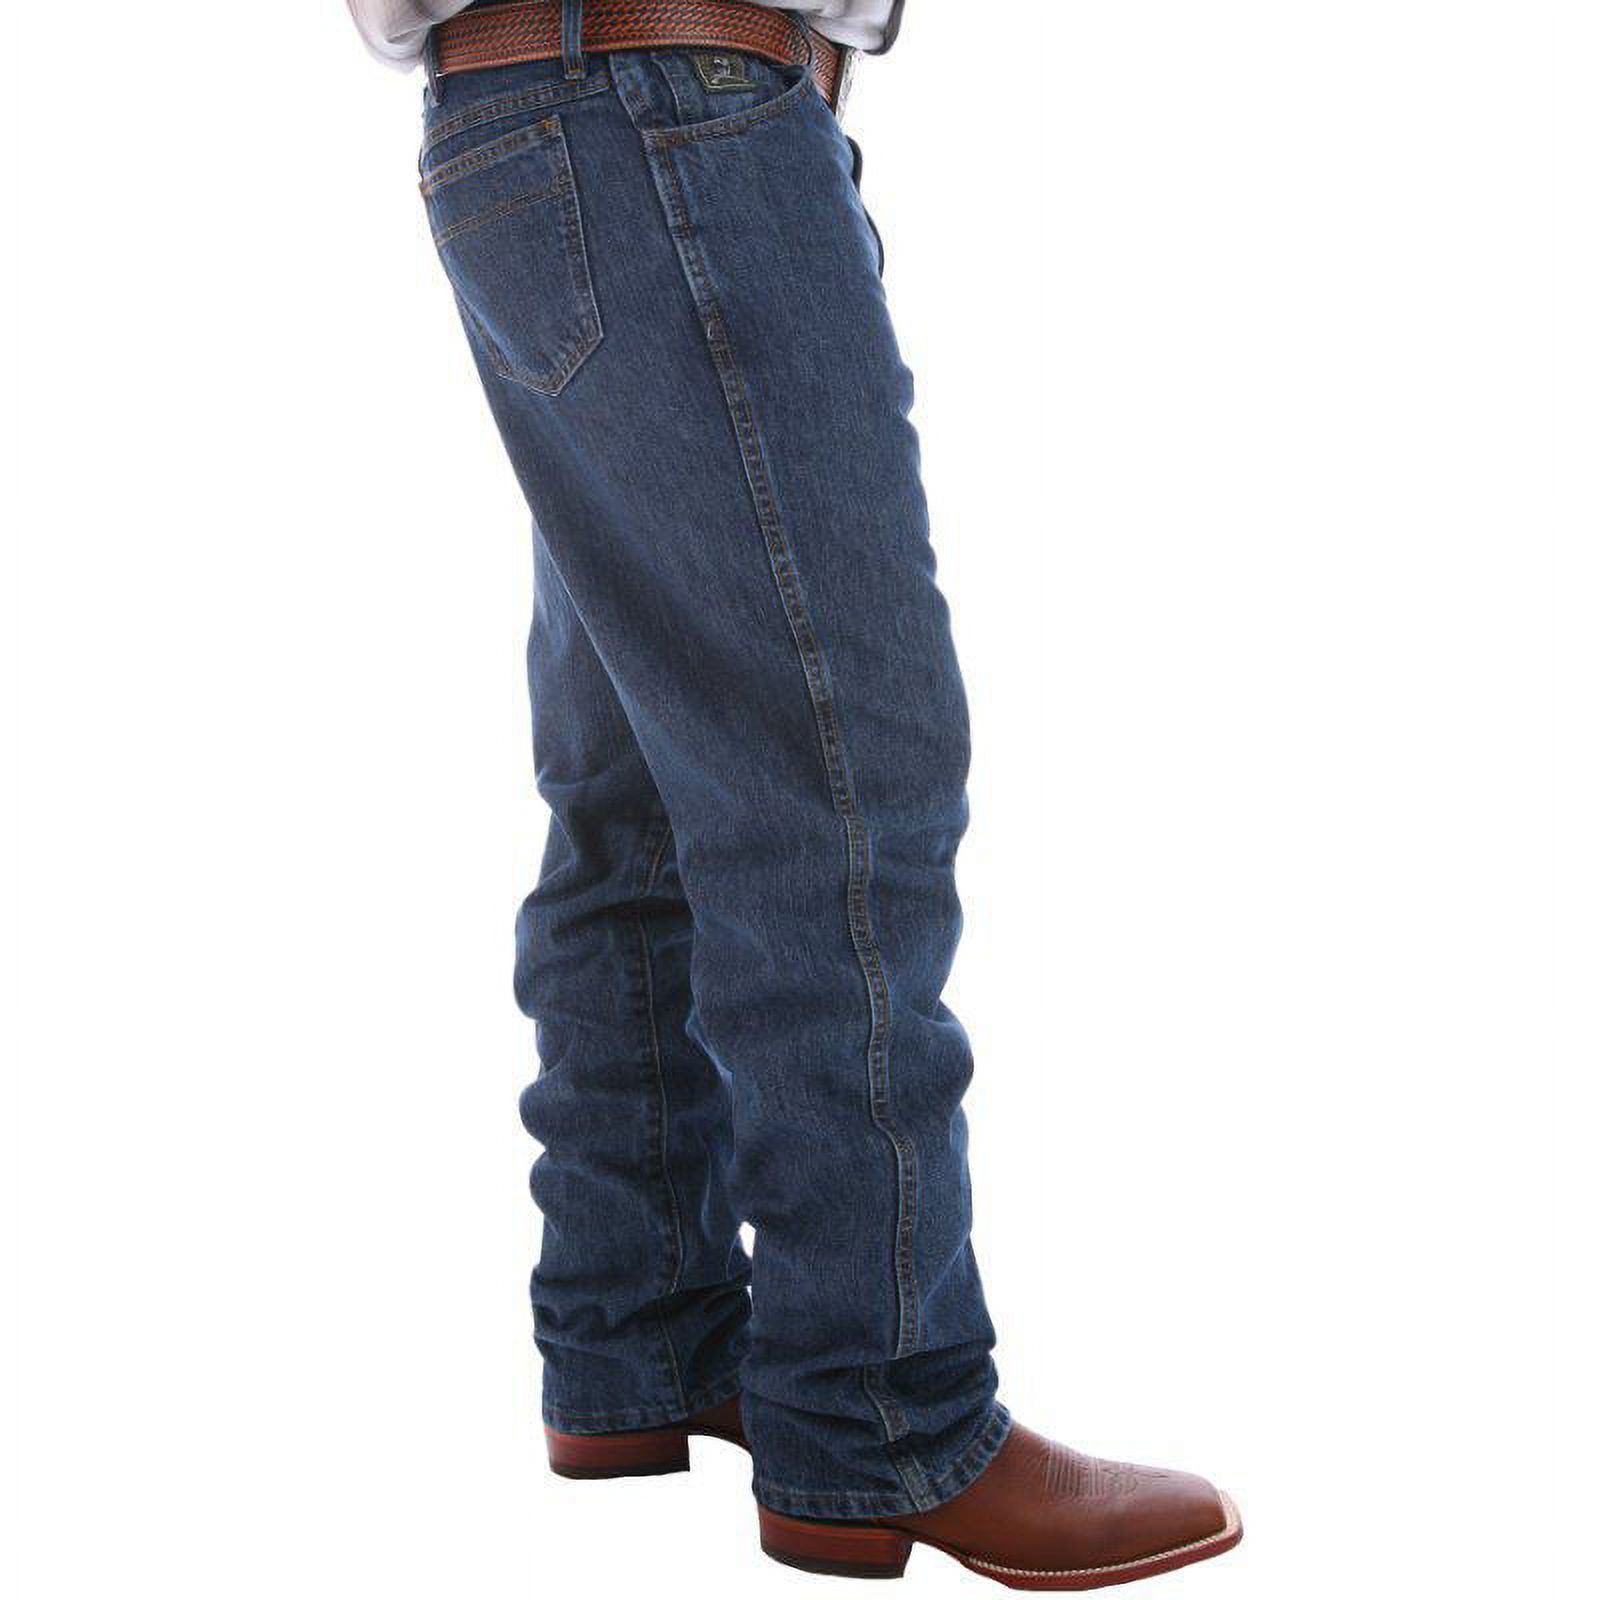 Cinch Men's Green Label Relaxed Fit Dark Stonewash Jeans Dark Stone 33W x 34L  US - image 4 of 4